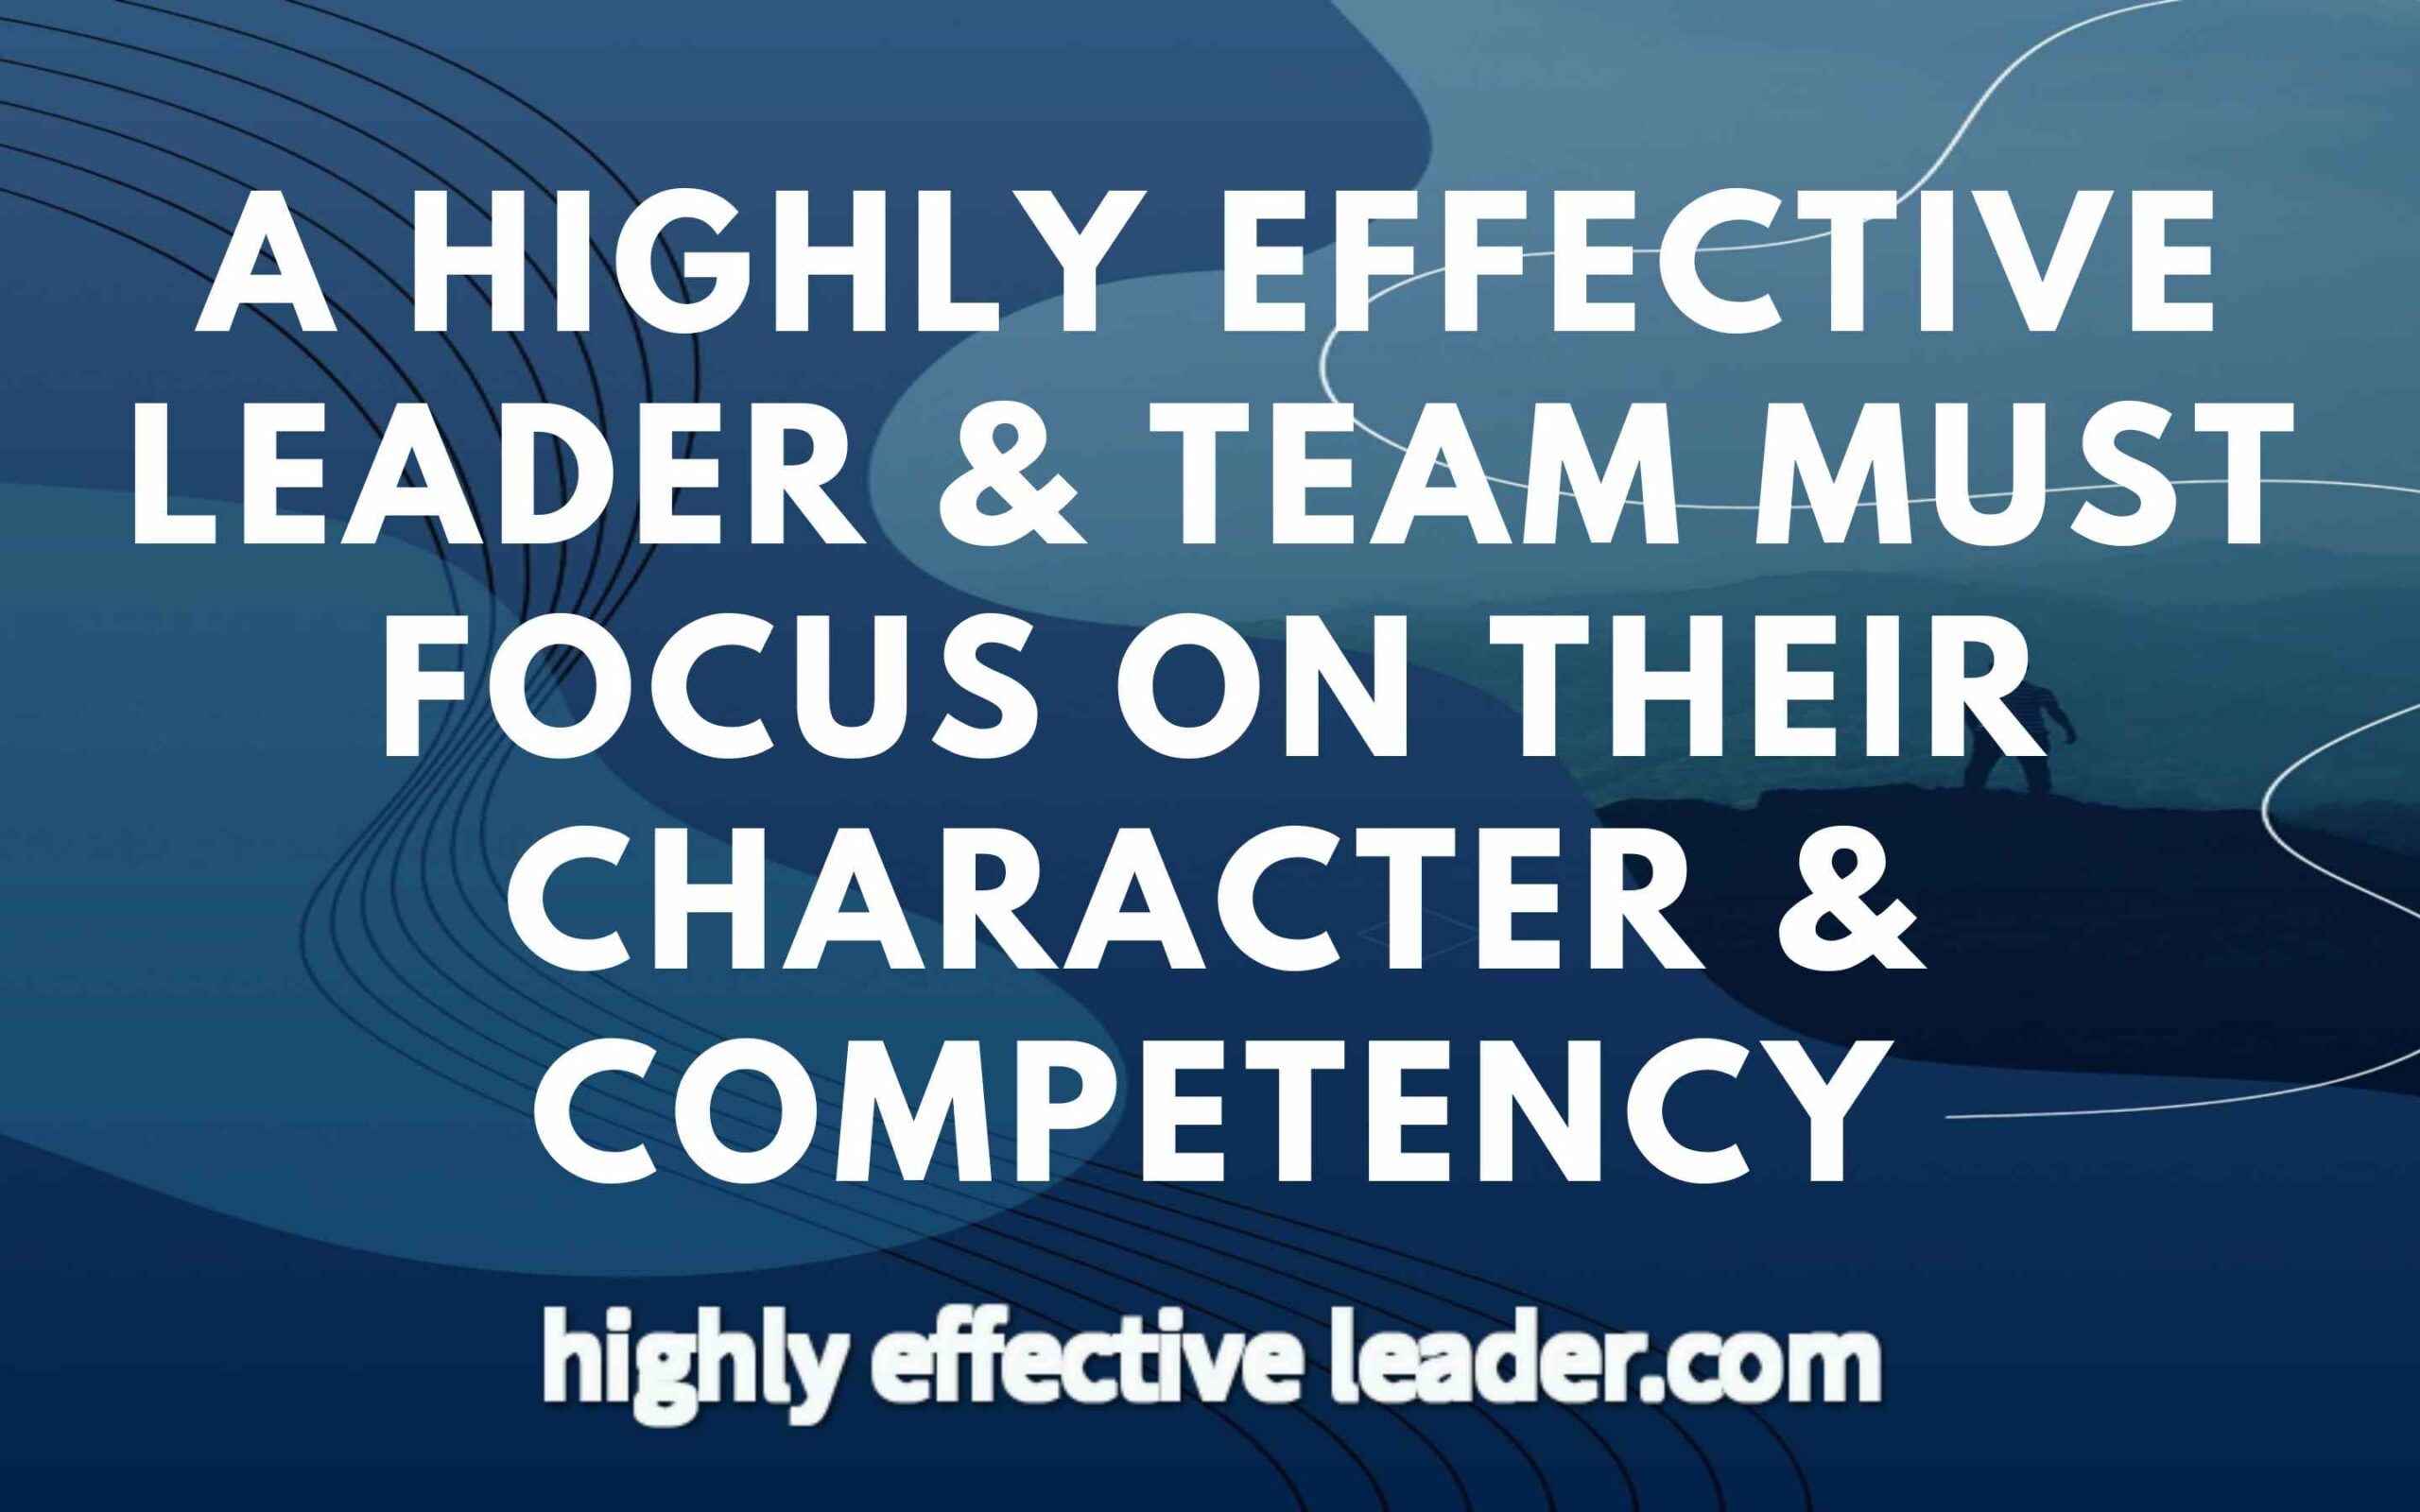 Competency and Character